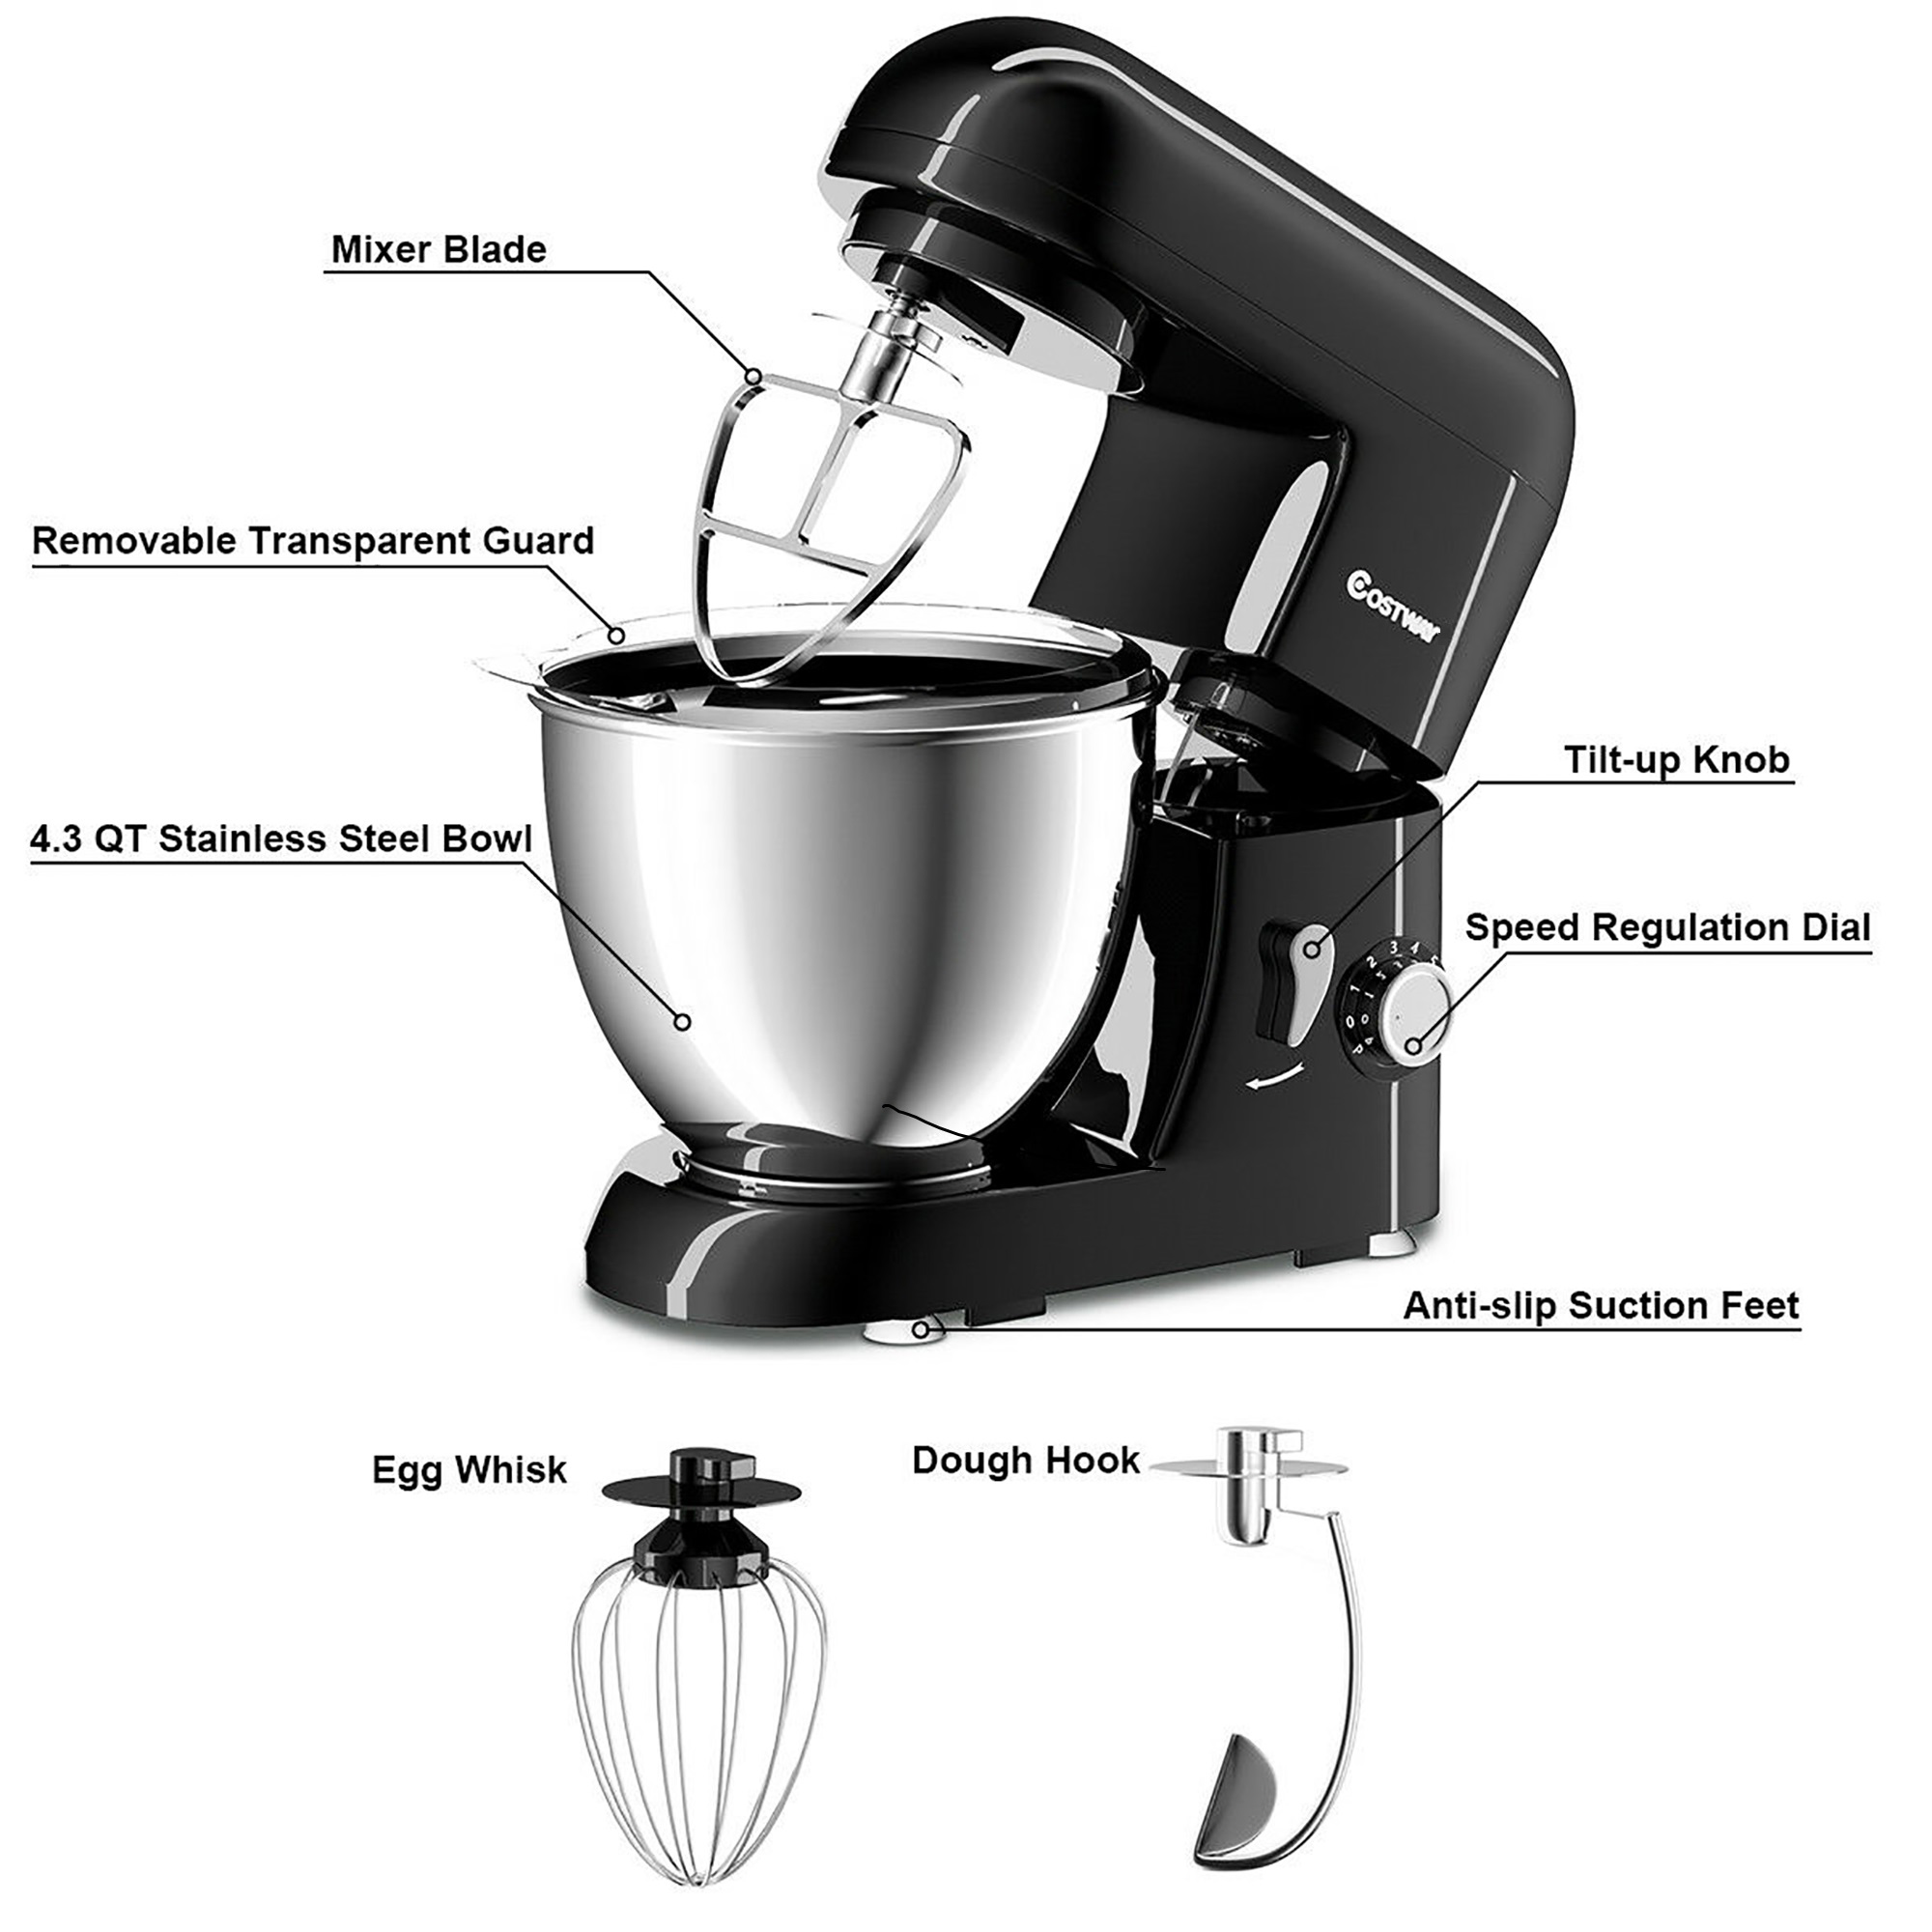 Costway Electric Food Stand Mixer 6 Speed 4.3Qt 550W Tilt-Head Stainless Steel Bowl New - image 4 of 9